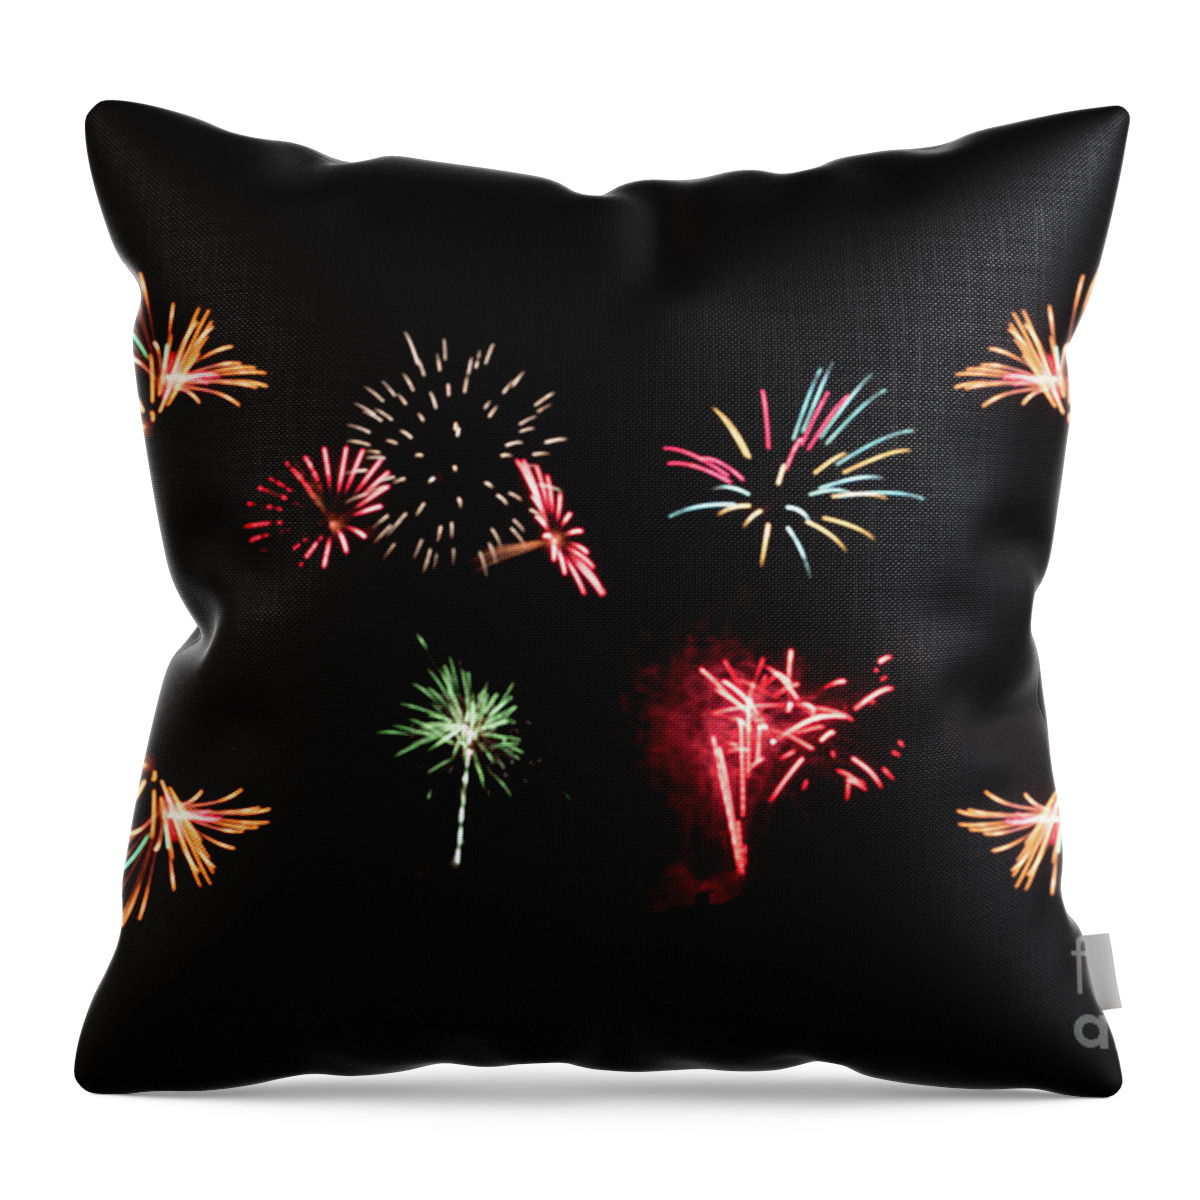 Fireworks Throw Pillow featuring the photograph Firework Frenzy by Steve Purnell